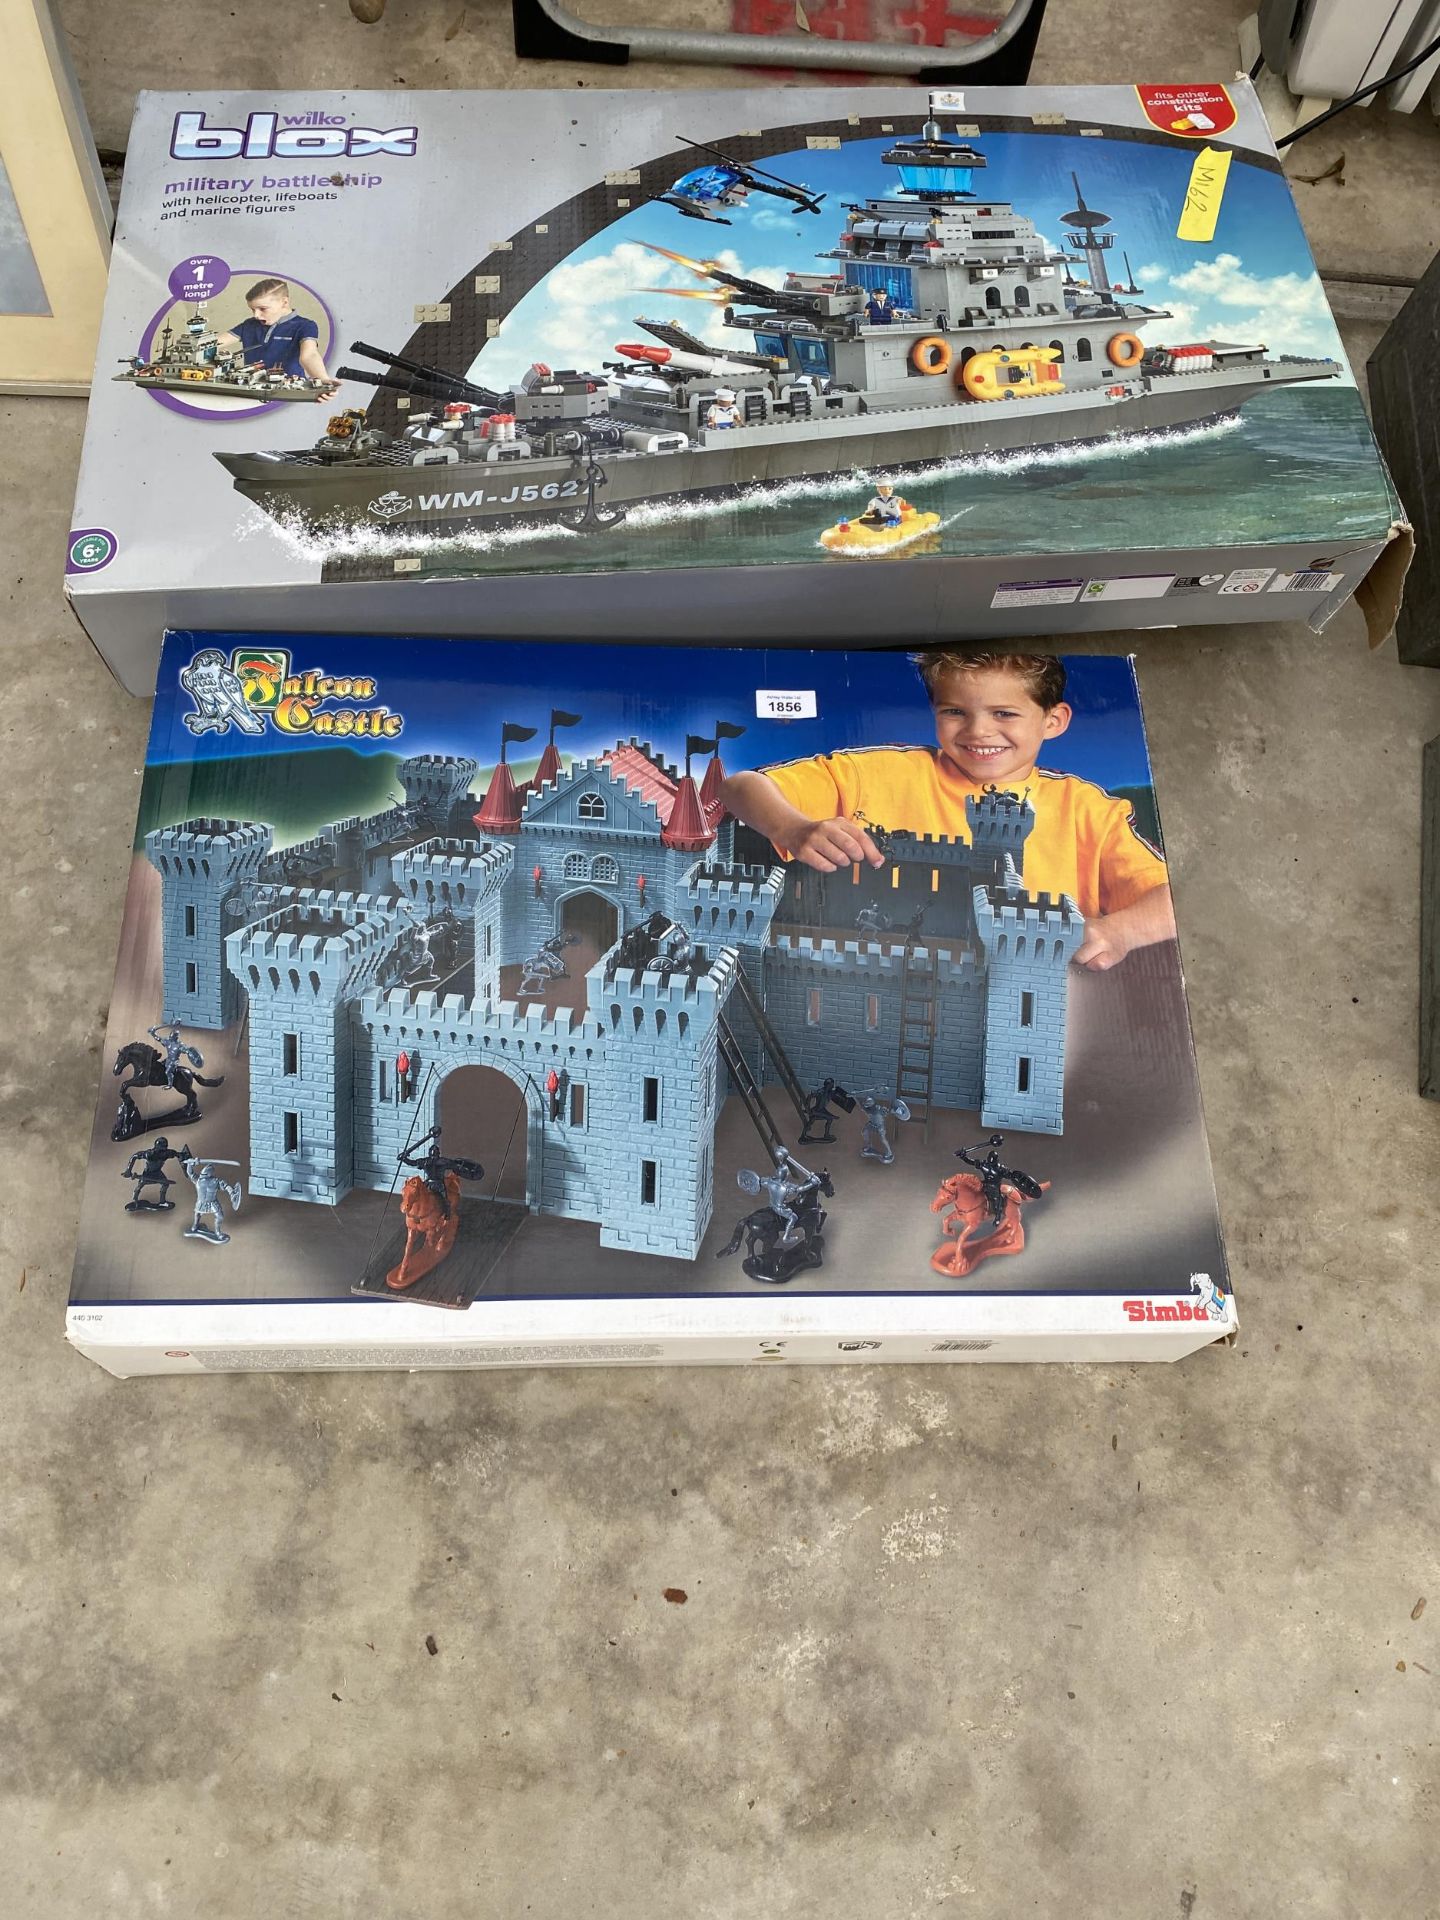 A SIMBA CASTLE AND A WILKO BLOX BUILDING SET